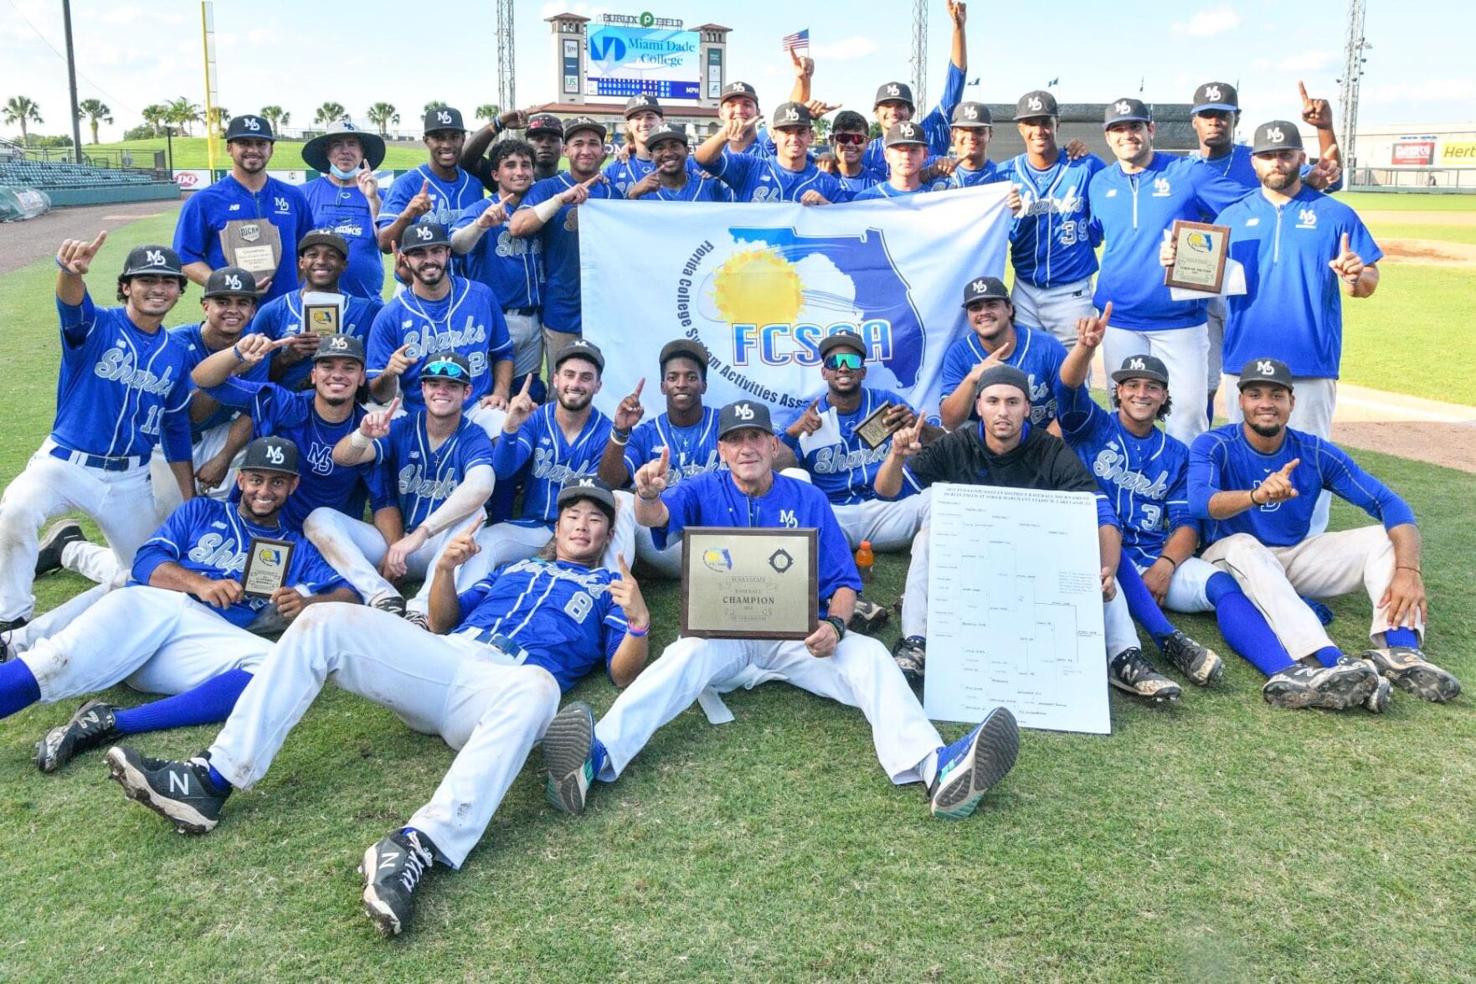 Miami Dade College’s Baseball Team Crowned State Champs | Sports